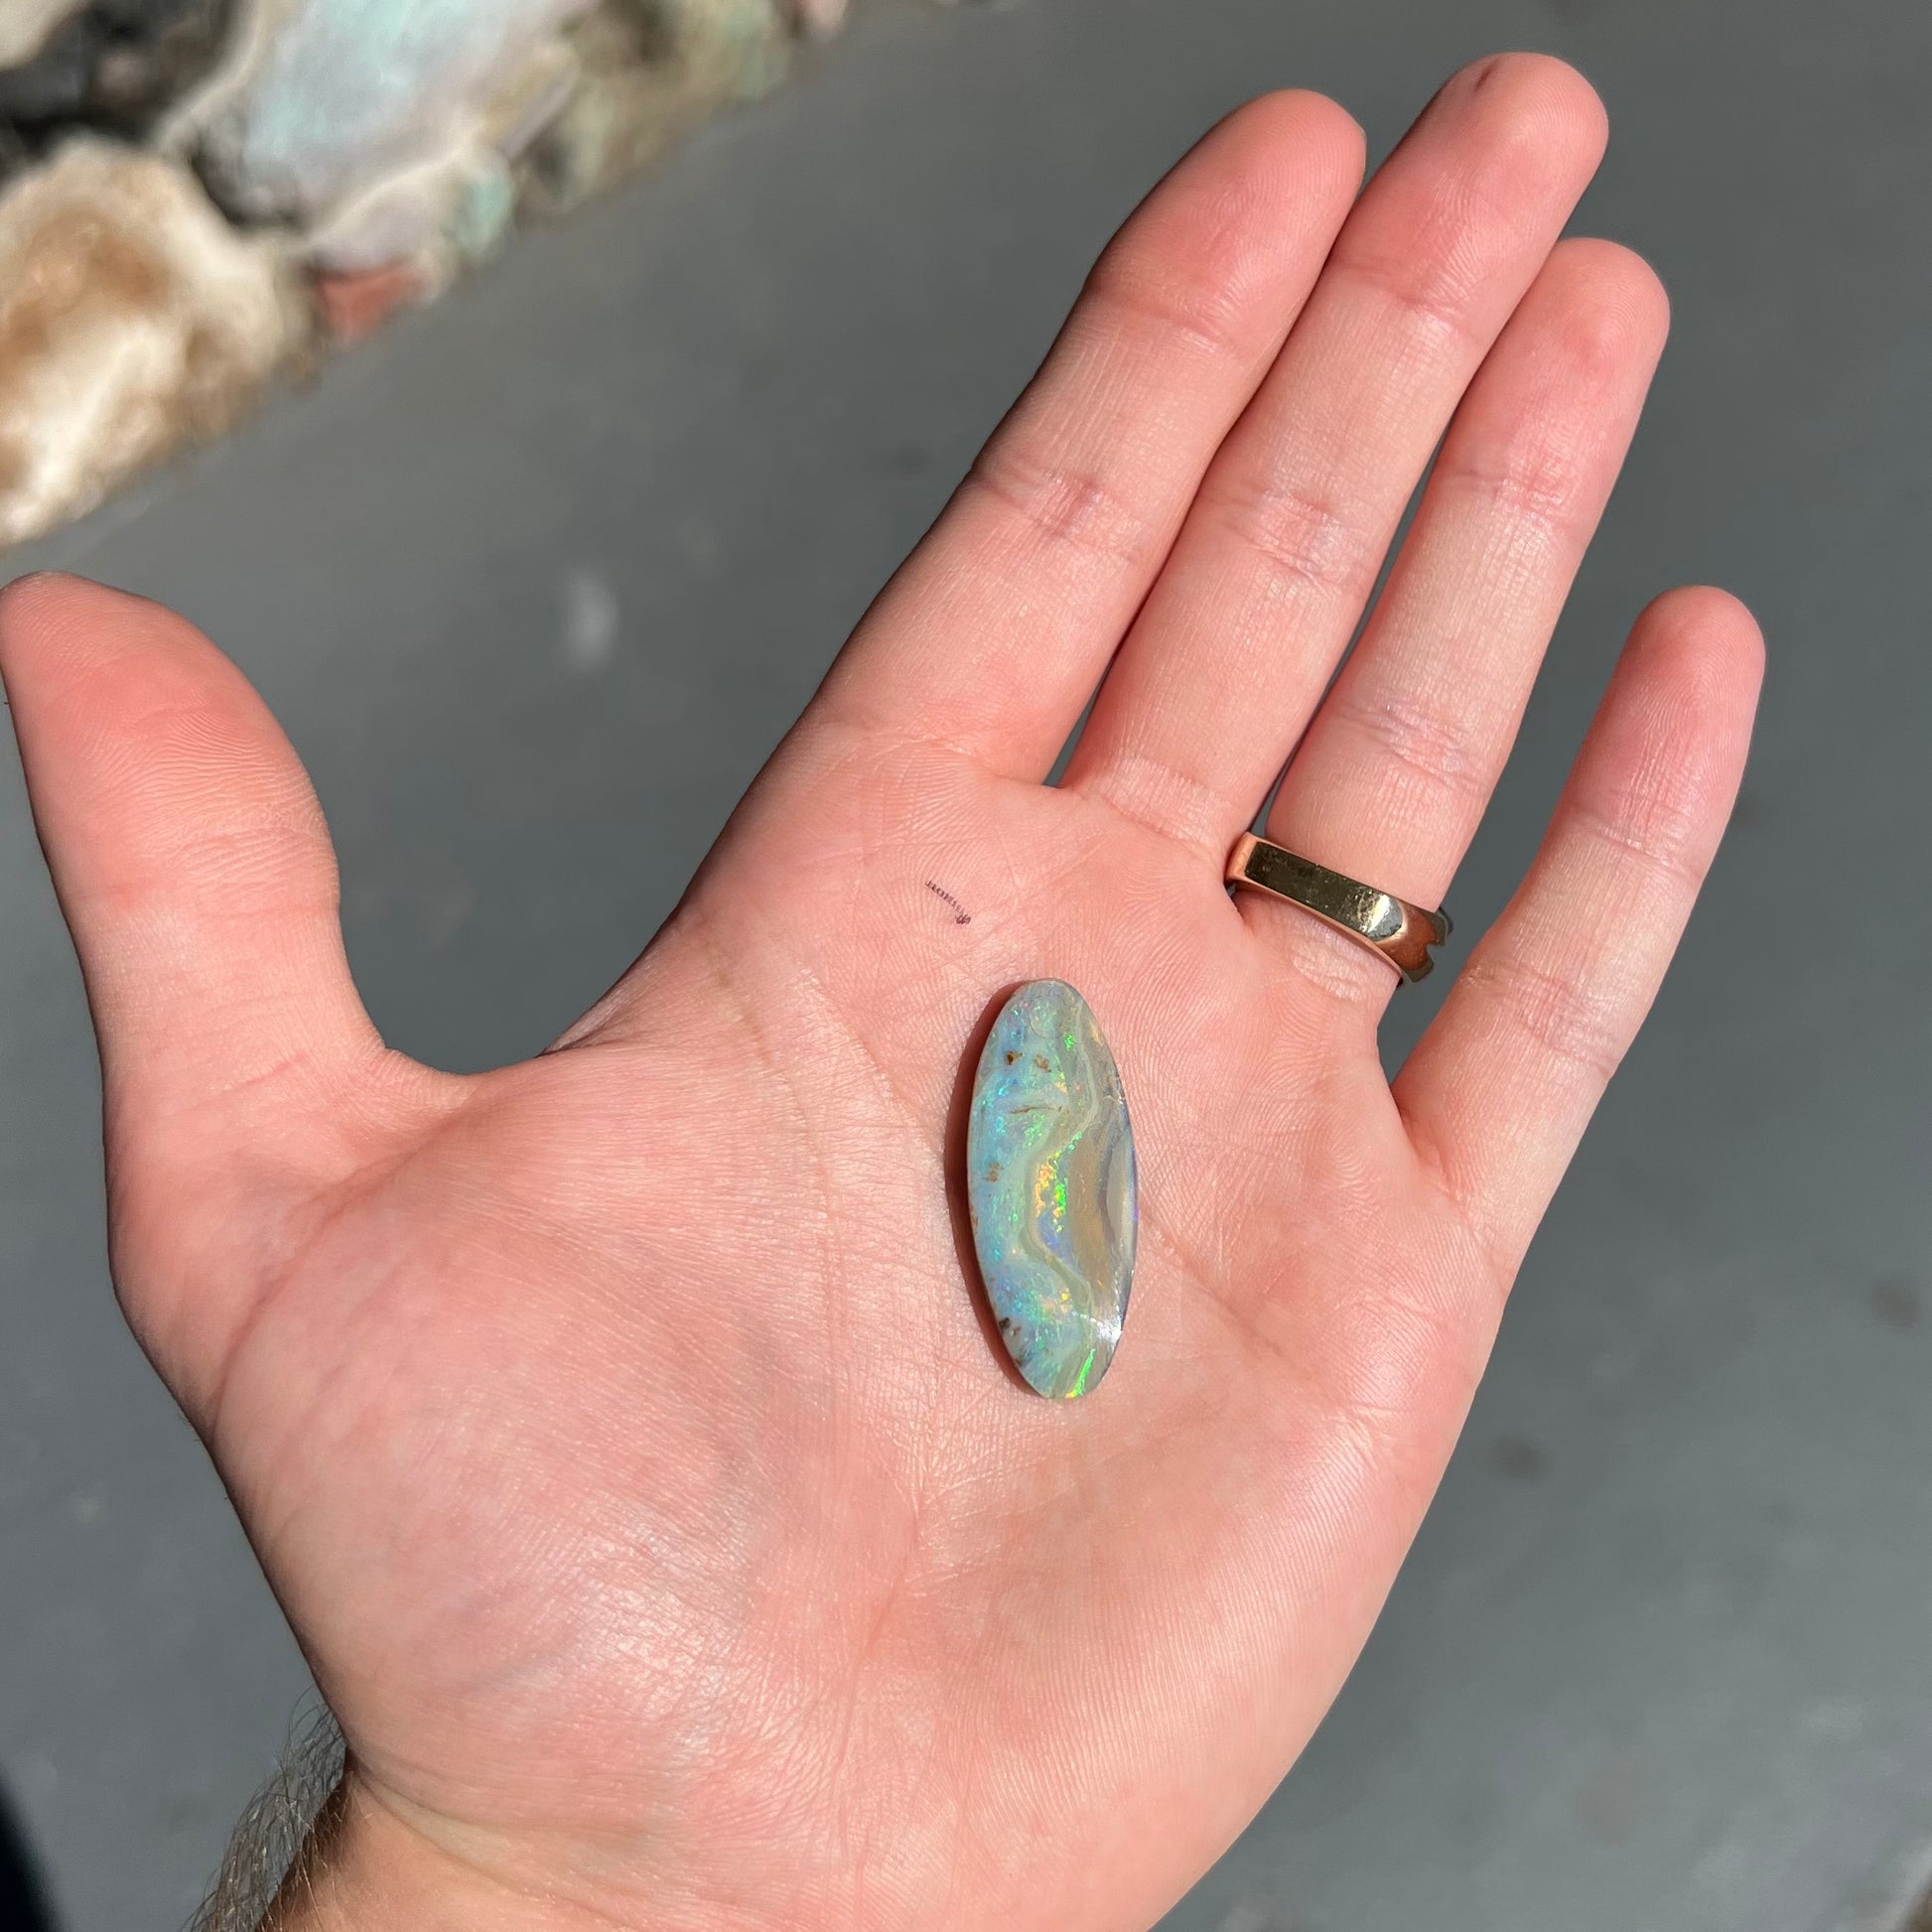 A loose, oval cabochon cut opal from Quilpie, Australia.  Blue, red, and green colors can be seen.